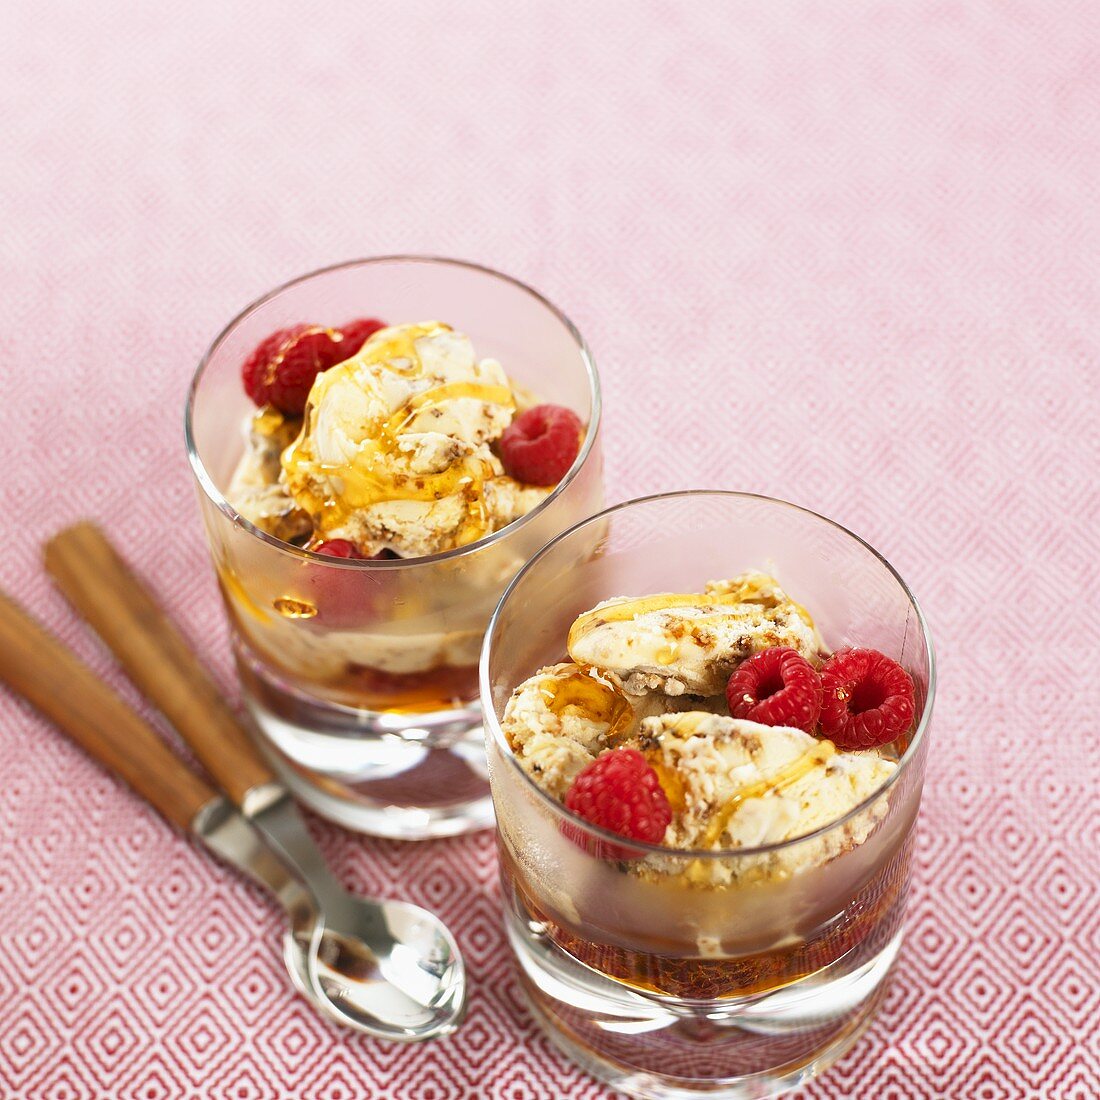 Honey and whisky ice cream with raspberries in whisky glass